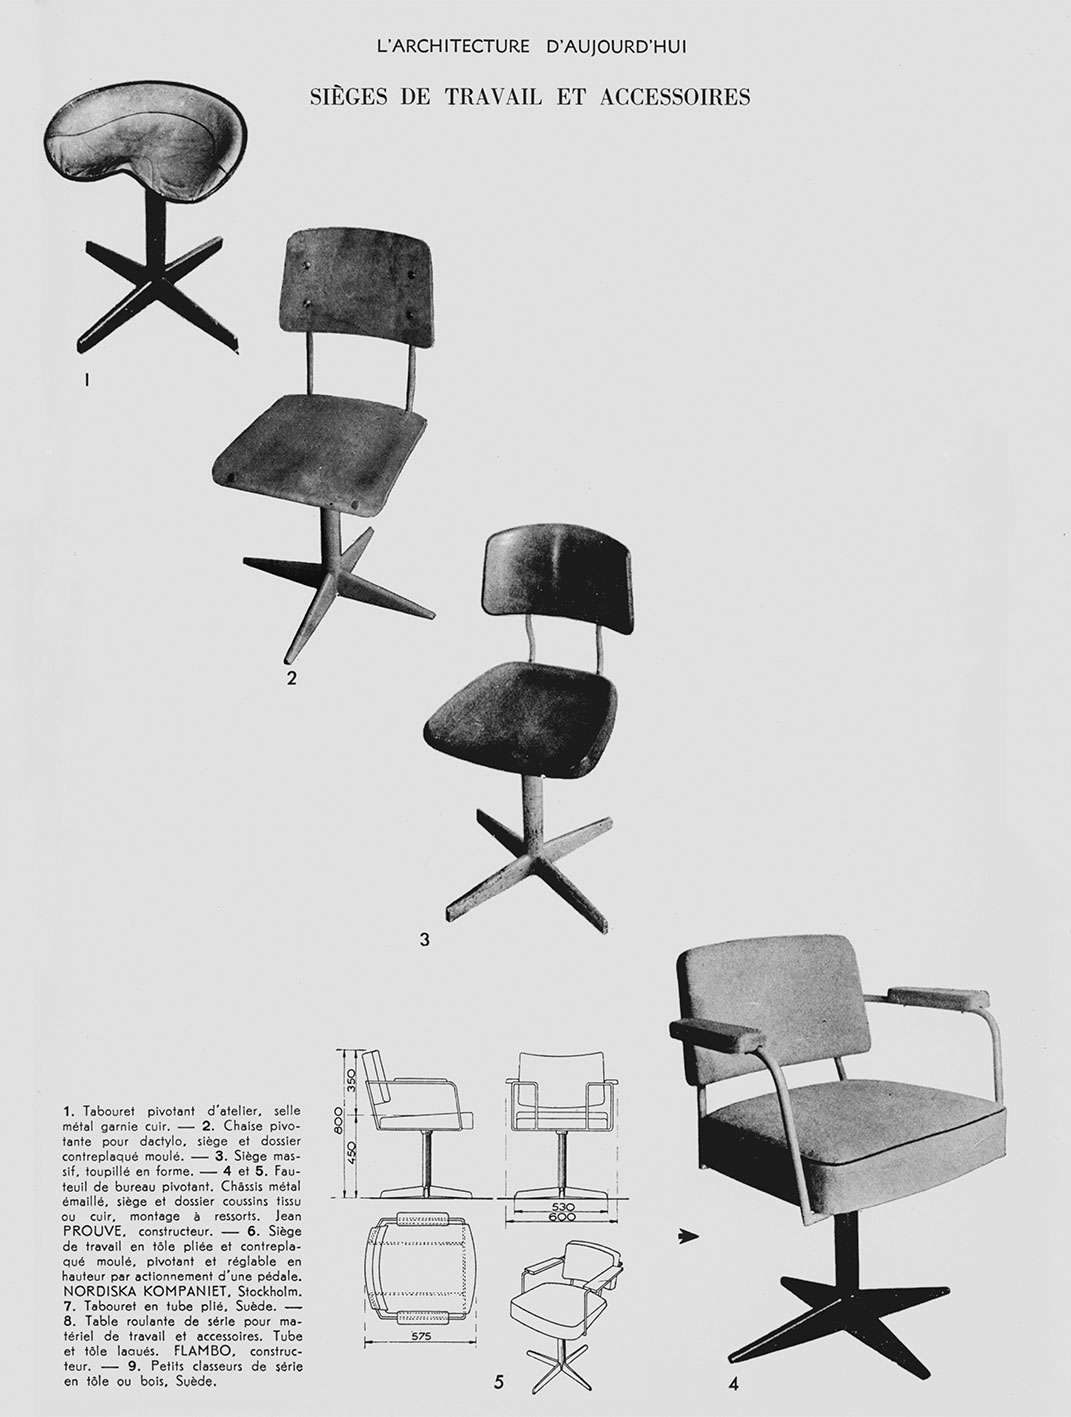 “Office chairs and work accessories”, from <i>L’Architecture d’aujourd’hui,</i> no. 11, 1947. Models of the Ateliers Jean Prouvé: workshop stool, swiveling typing chairs with plywood (CD 11) or solid wood seats, swiveling armchair (FP 11).